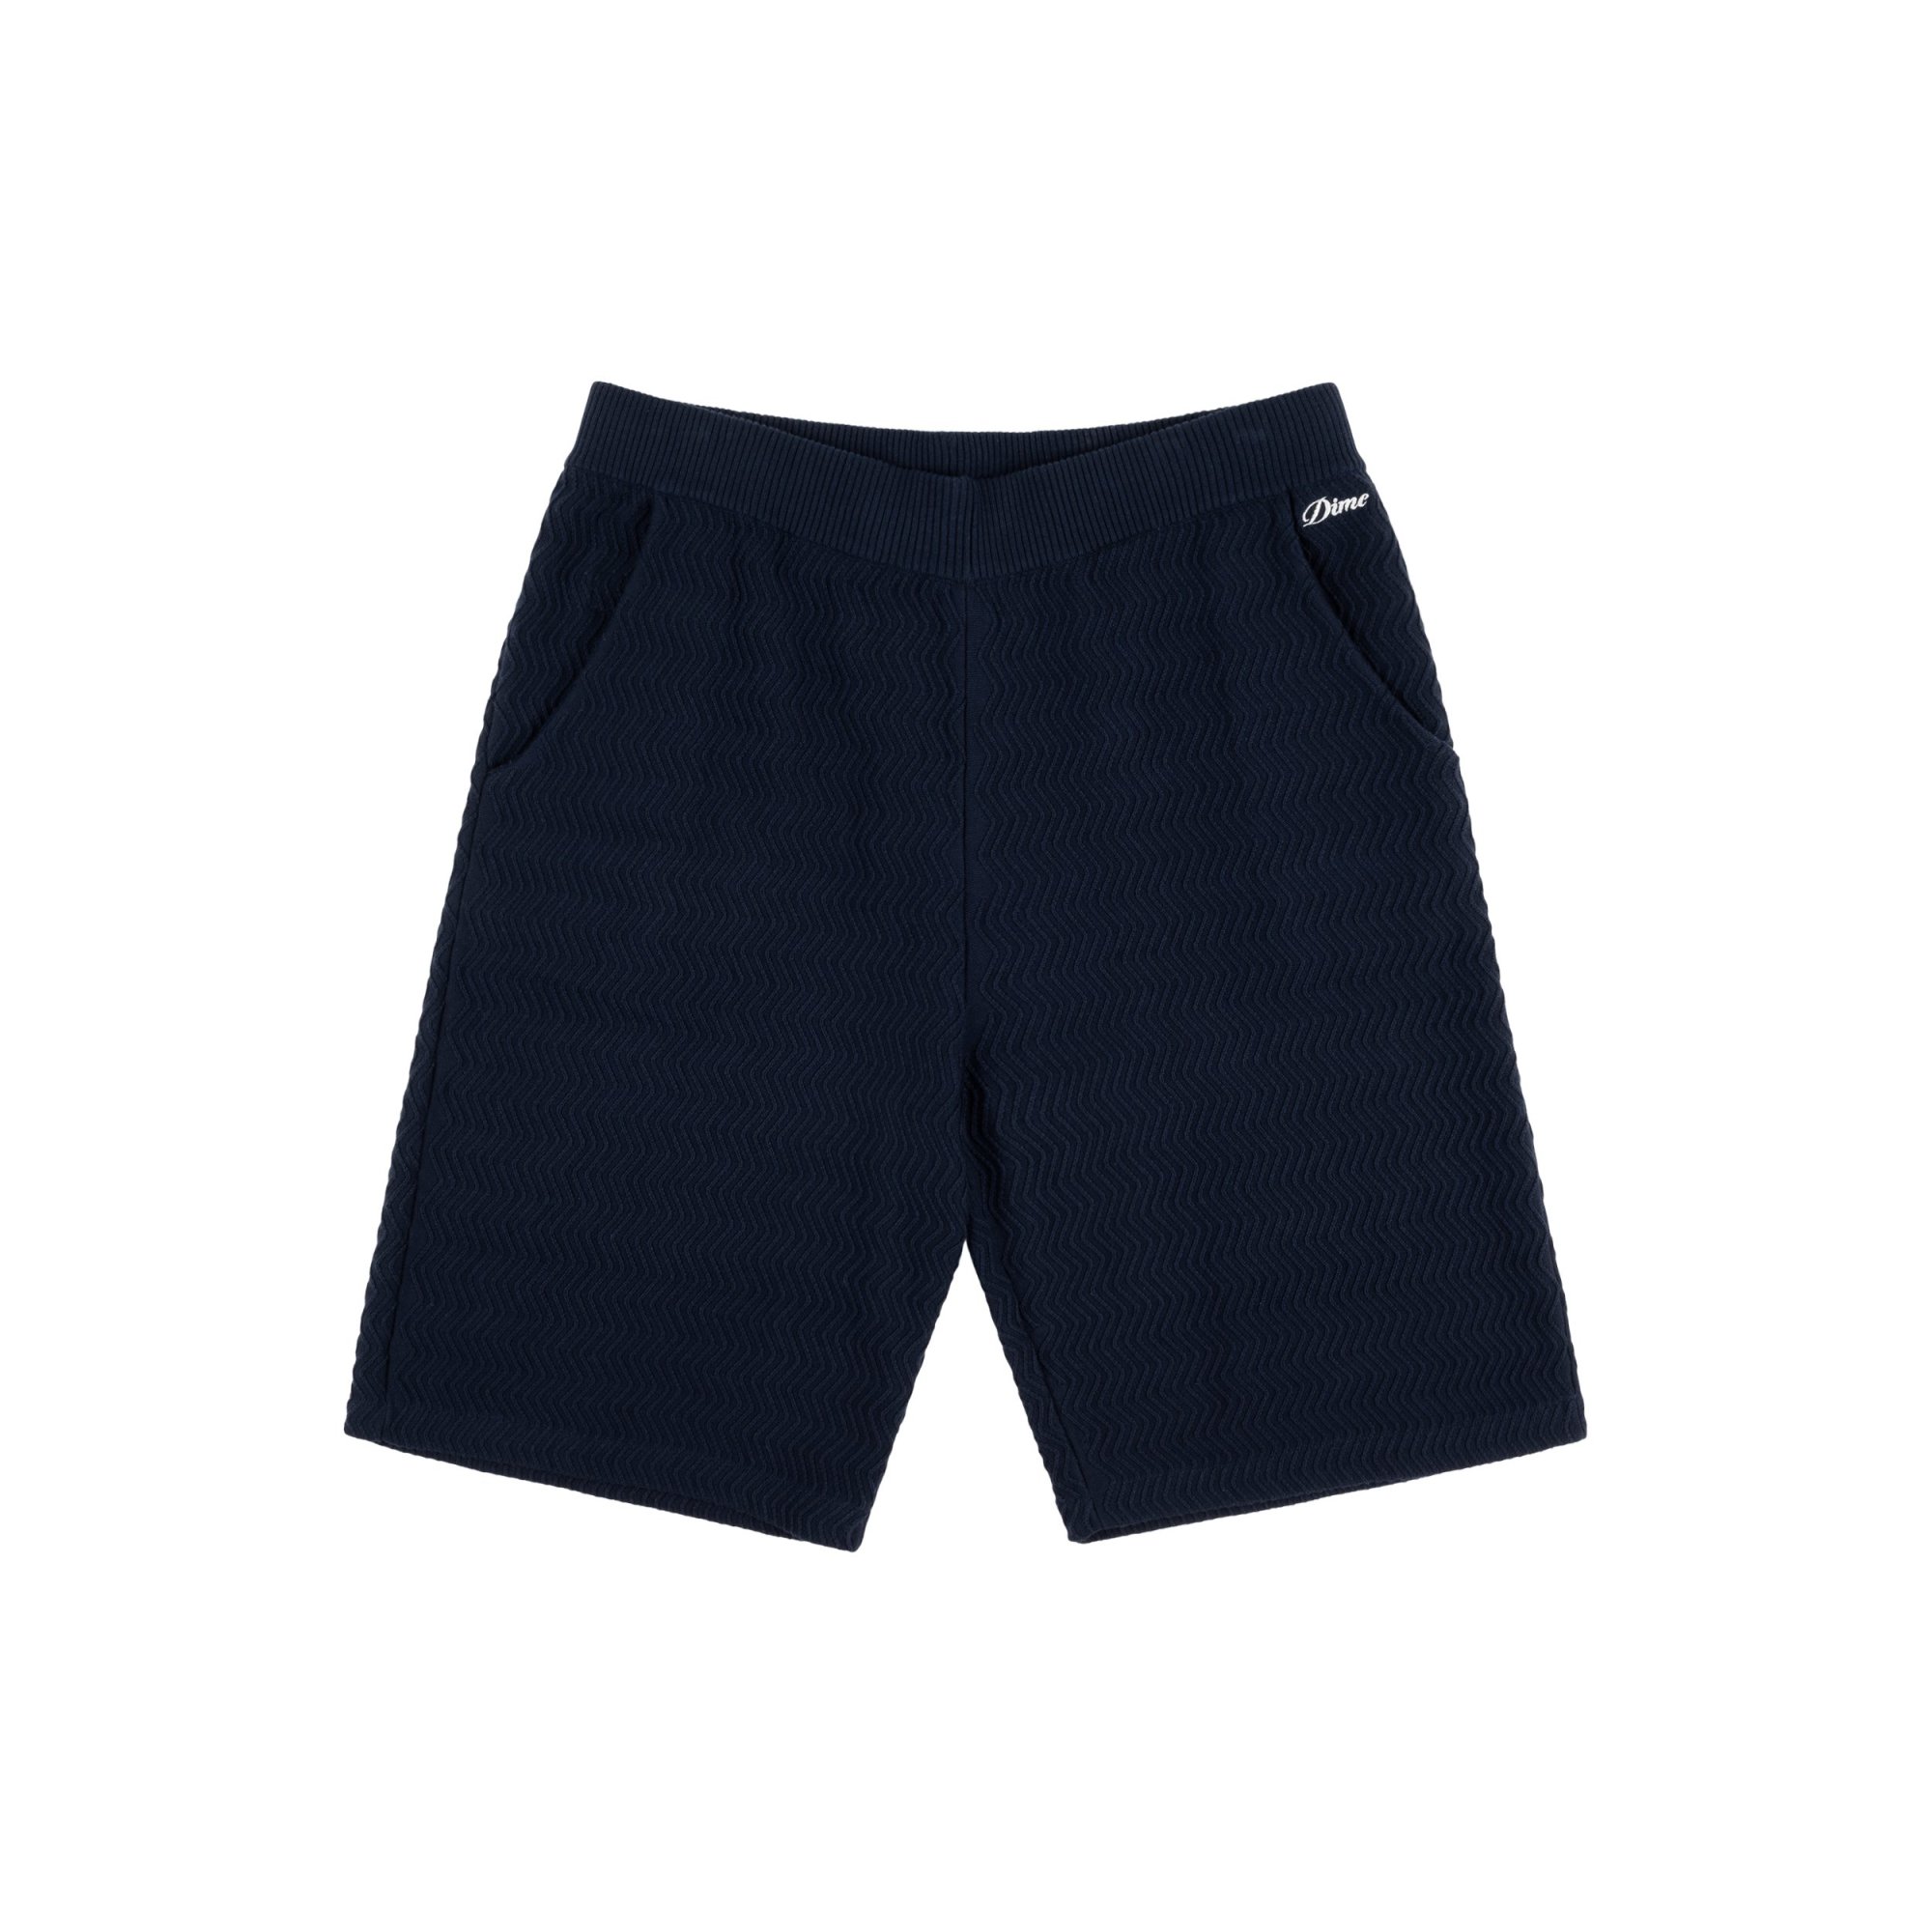 DIME<br>WAVE CABLE KNIT SHORTS
<br>